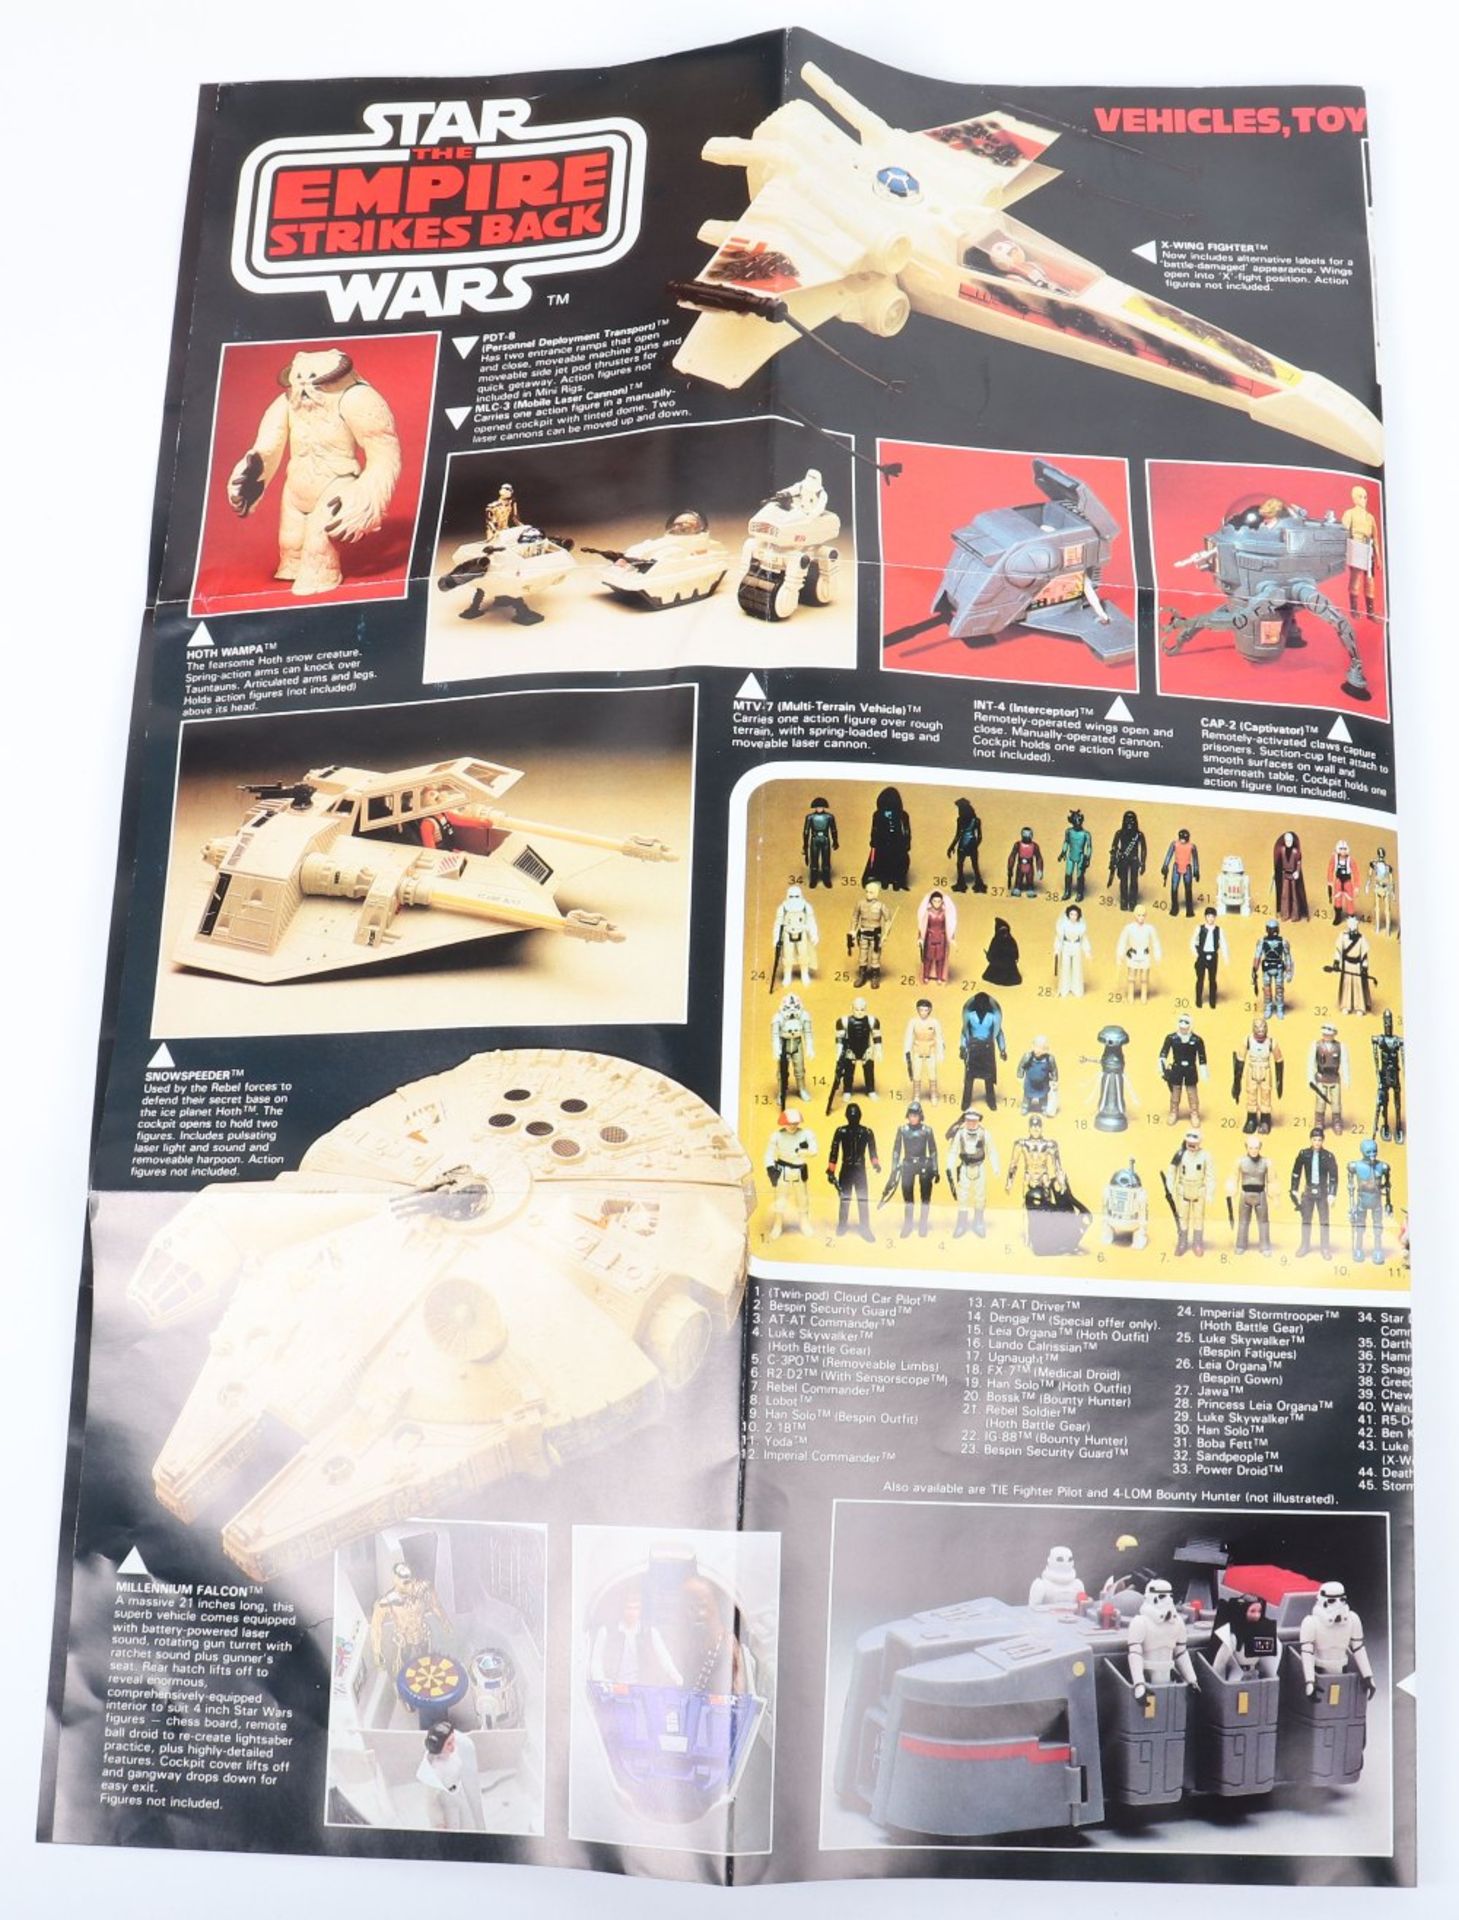 Boxed Palitoy Star Wars The Empire Strikes Back Dagobah Action Playset - Image 6 of 13